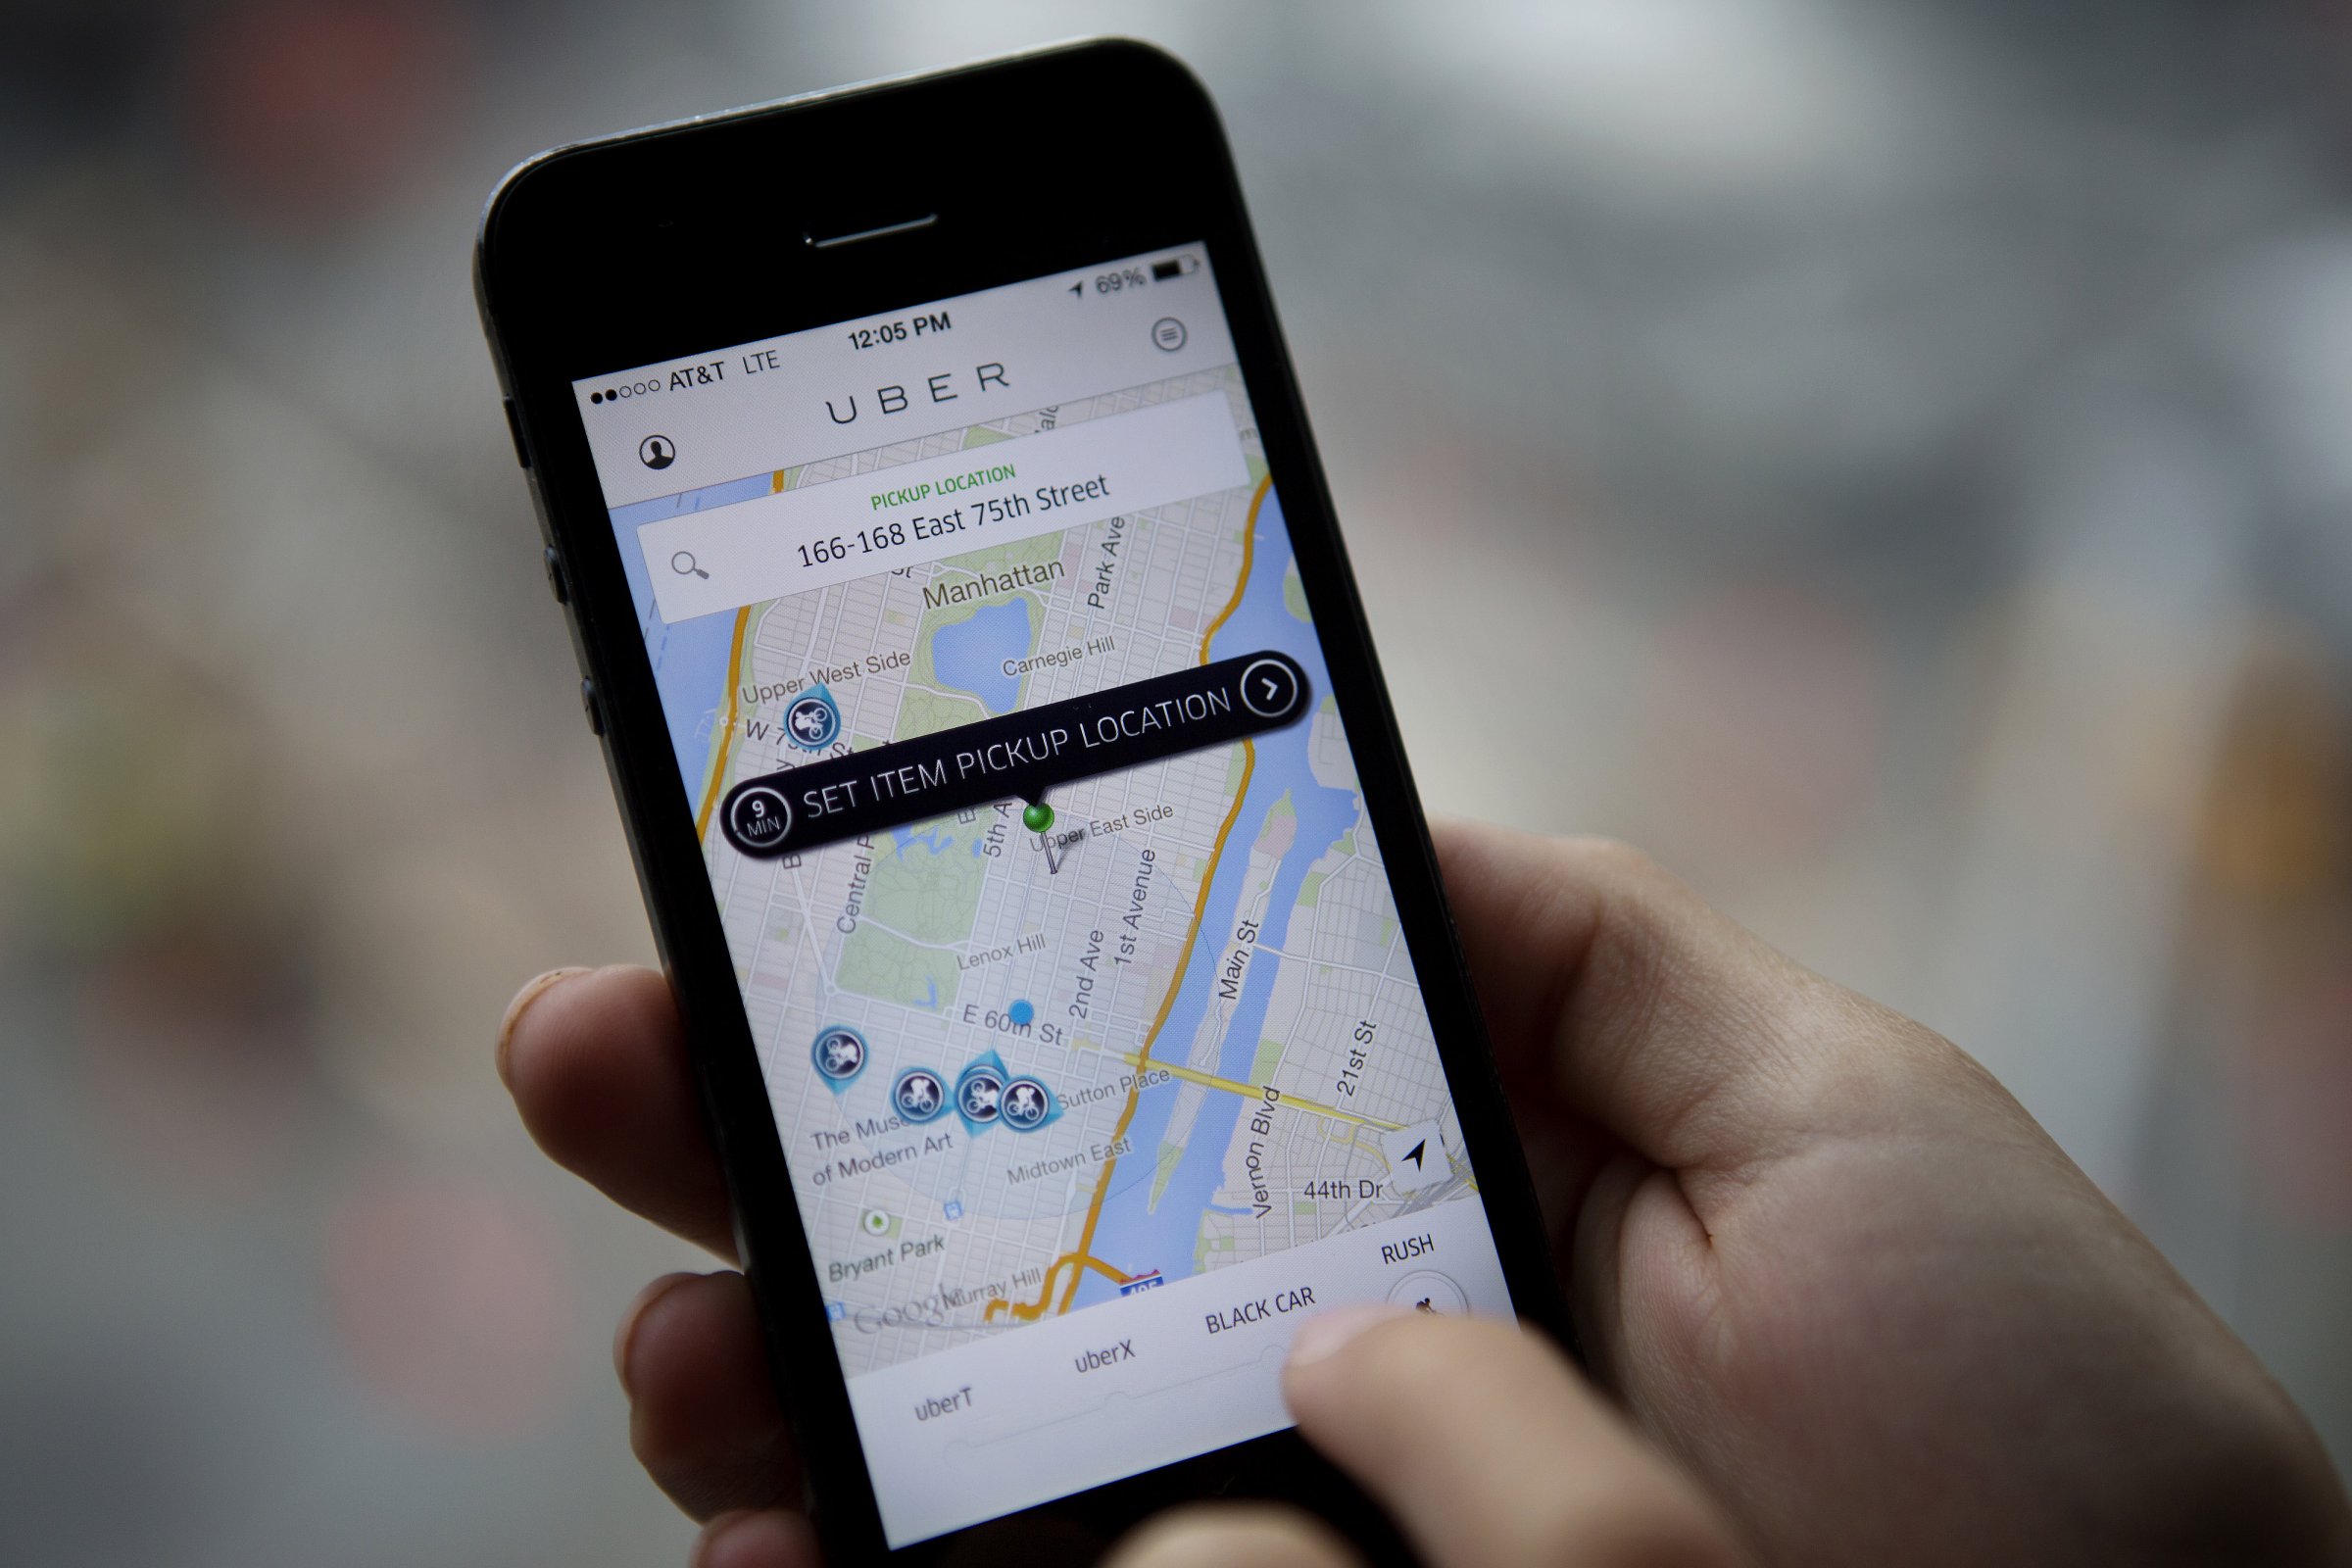 Uber Technologies Inc. car service application (app) is demonstrated for a photograph on an Apple Inc. iPhone in New York, U.S., on, Aug. 6, 2014